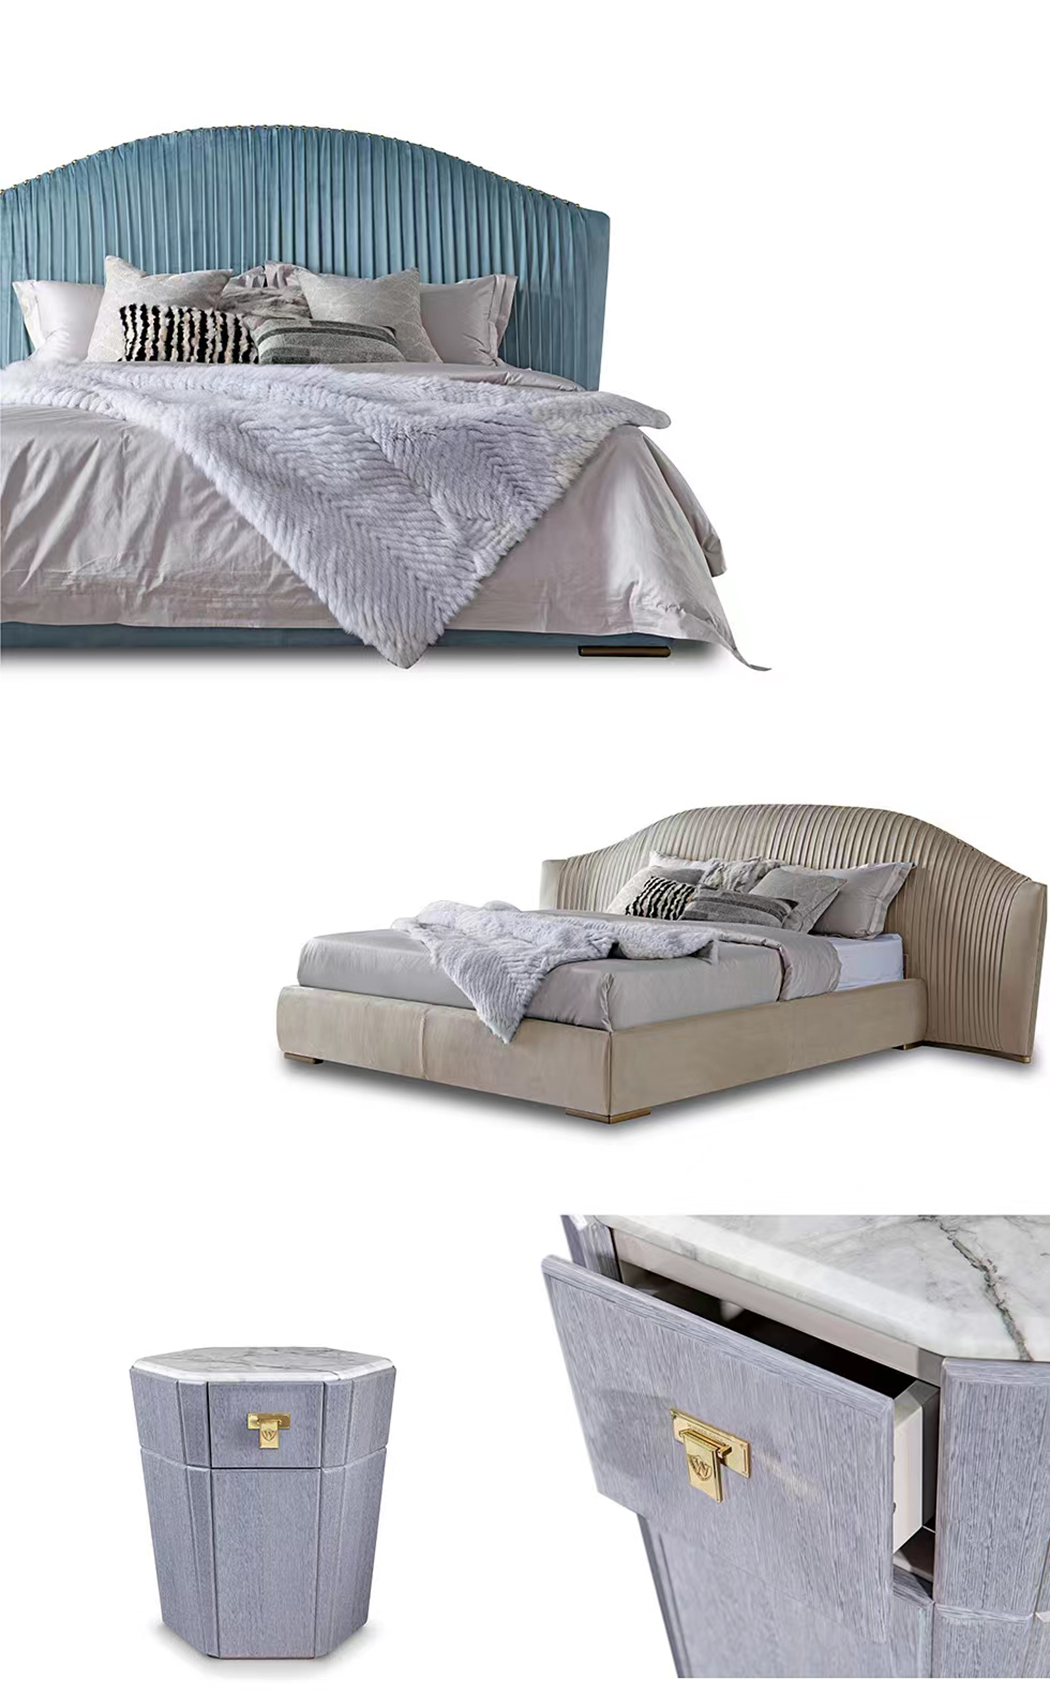 High-Quality Bedroom King Bed